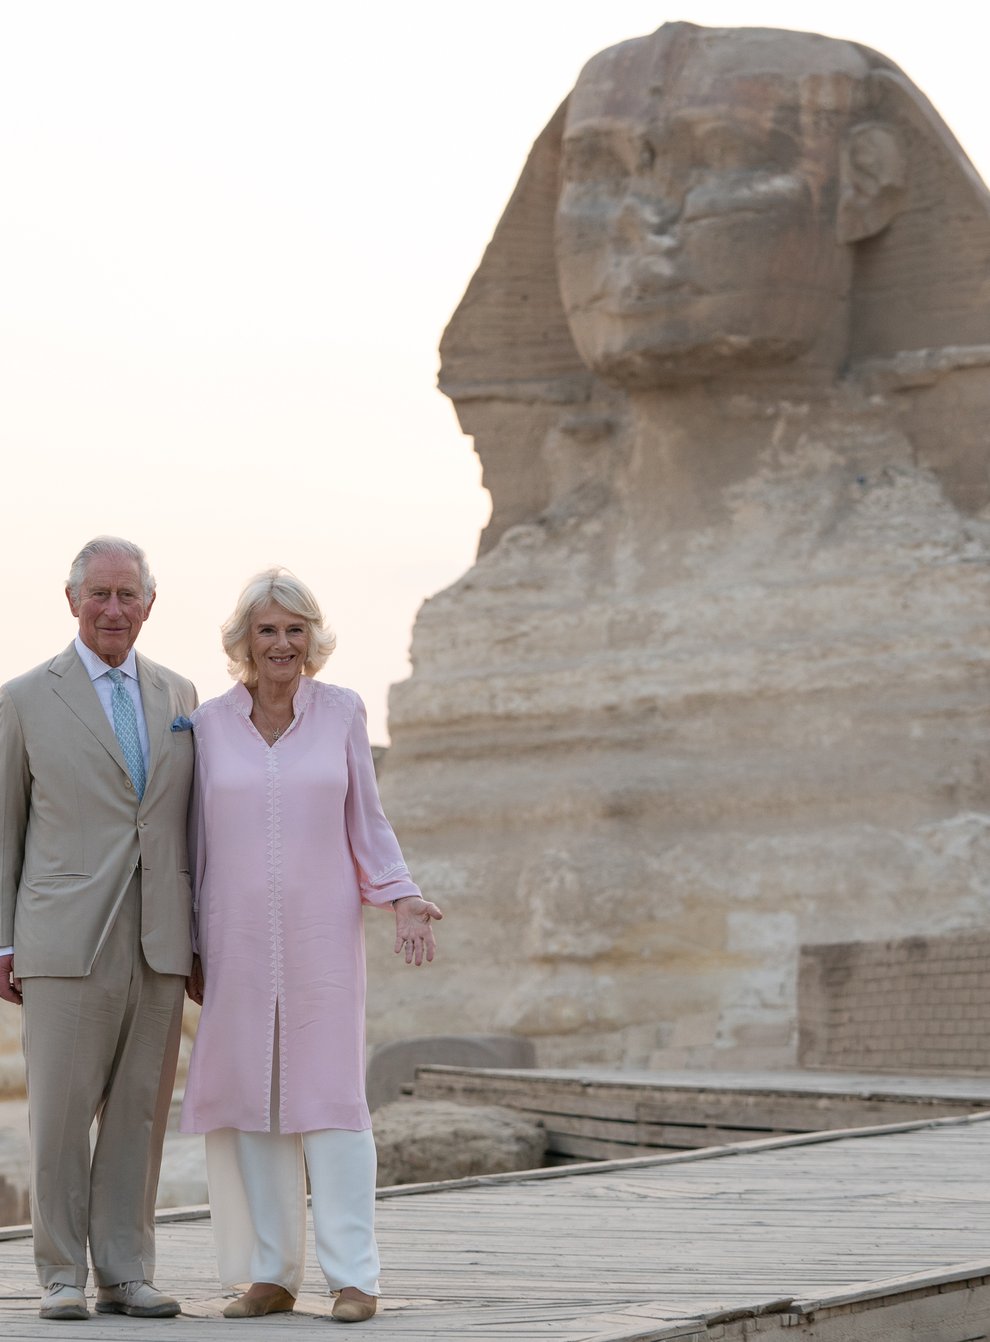 The Prince of Wales and The Duchess of Cornwall pose in front of the Sphinx during their visit to Egypt (Joe Giddens/PA)